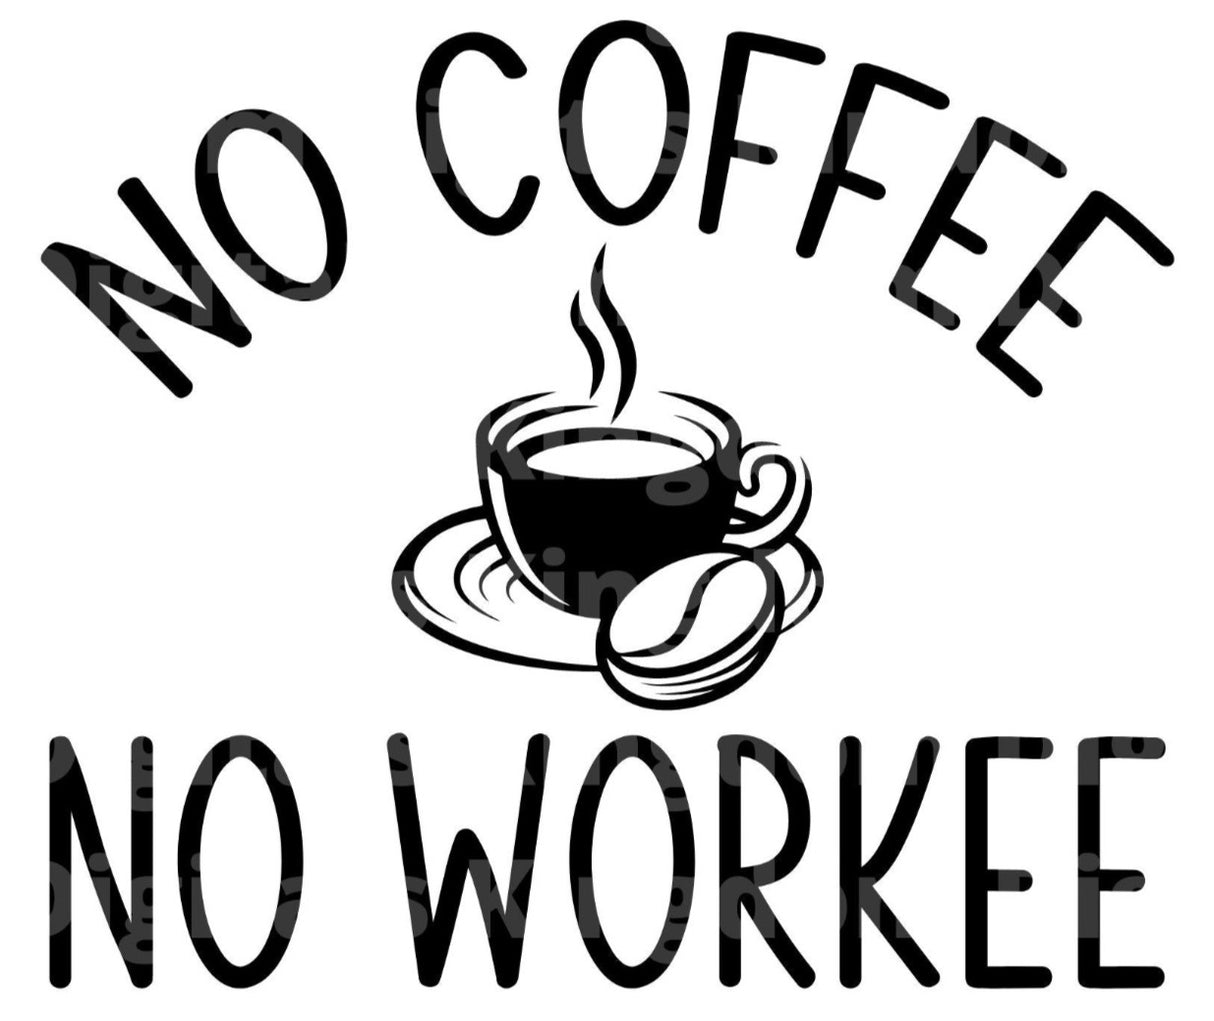 No Coffee No Workee SVG Cut File